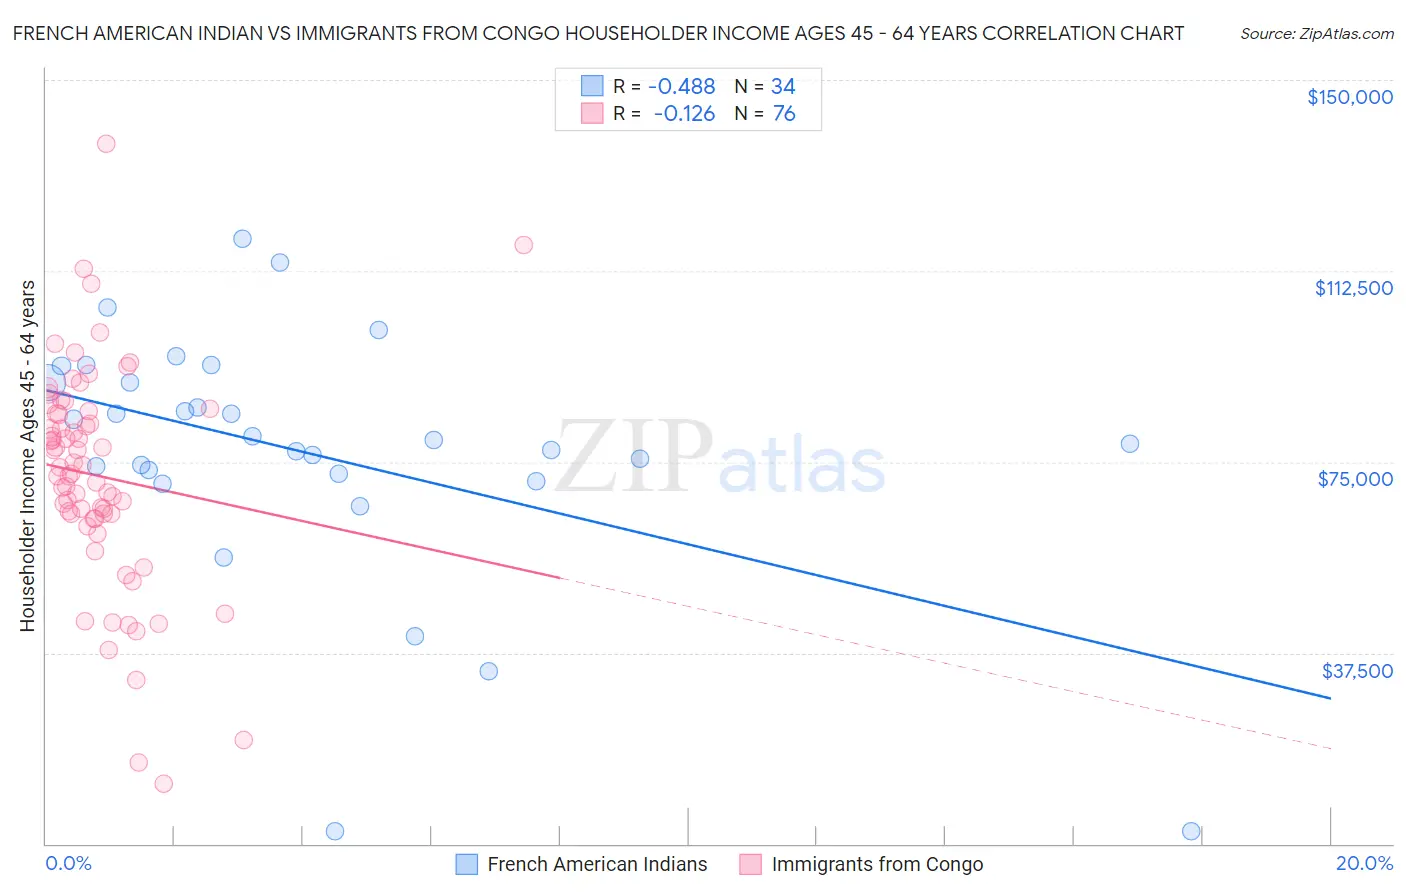 French American Indian vs Immigrants from Congo Householder Income Ages 45 - 64 years